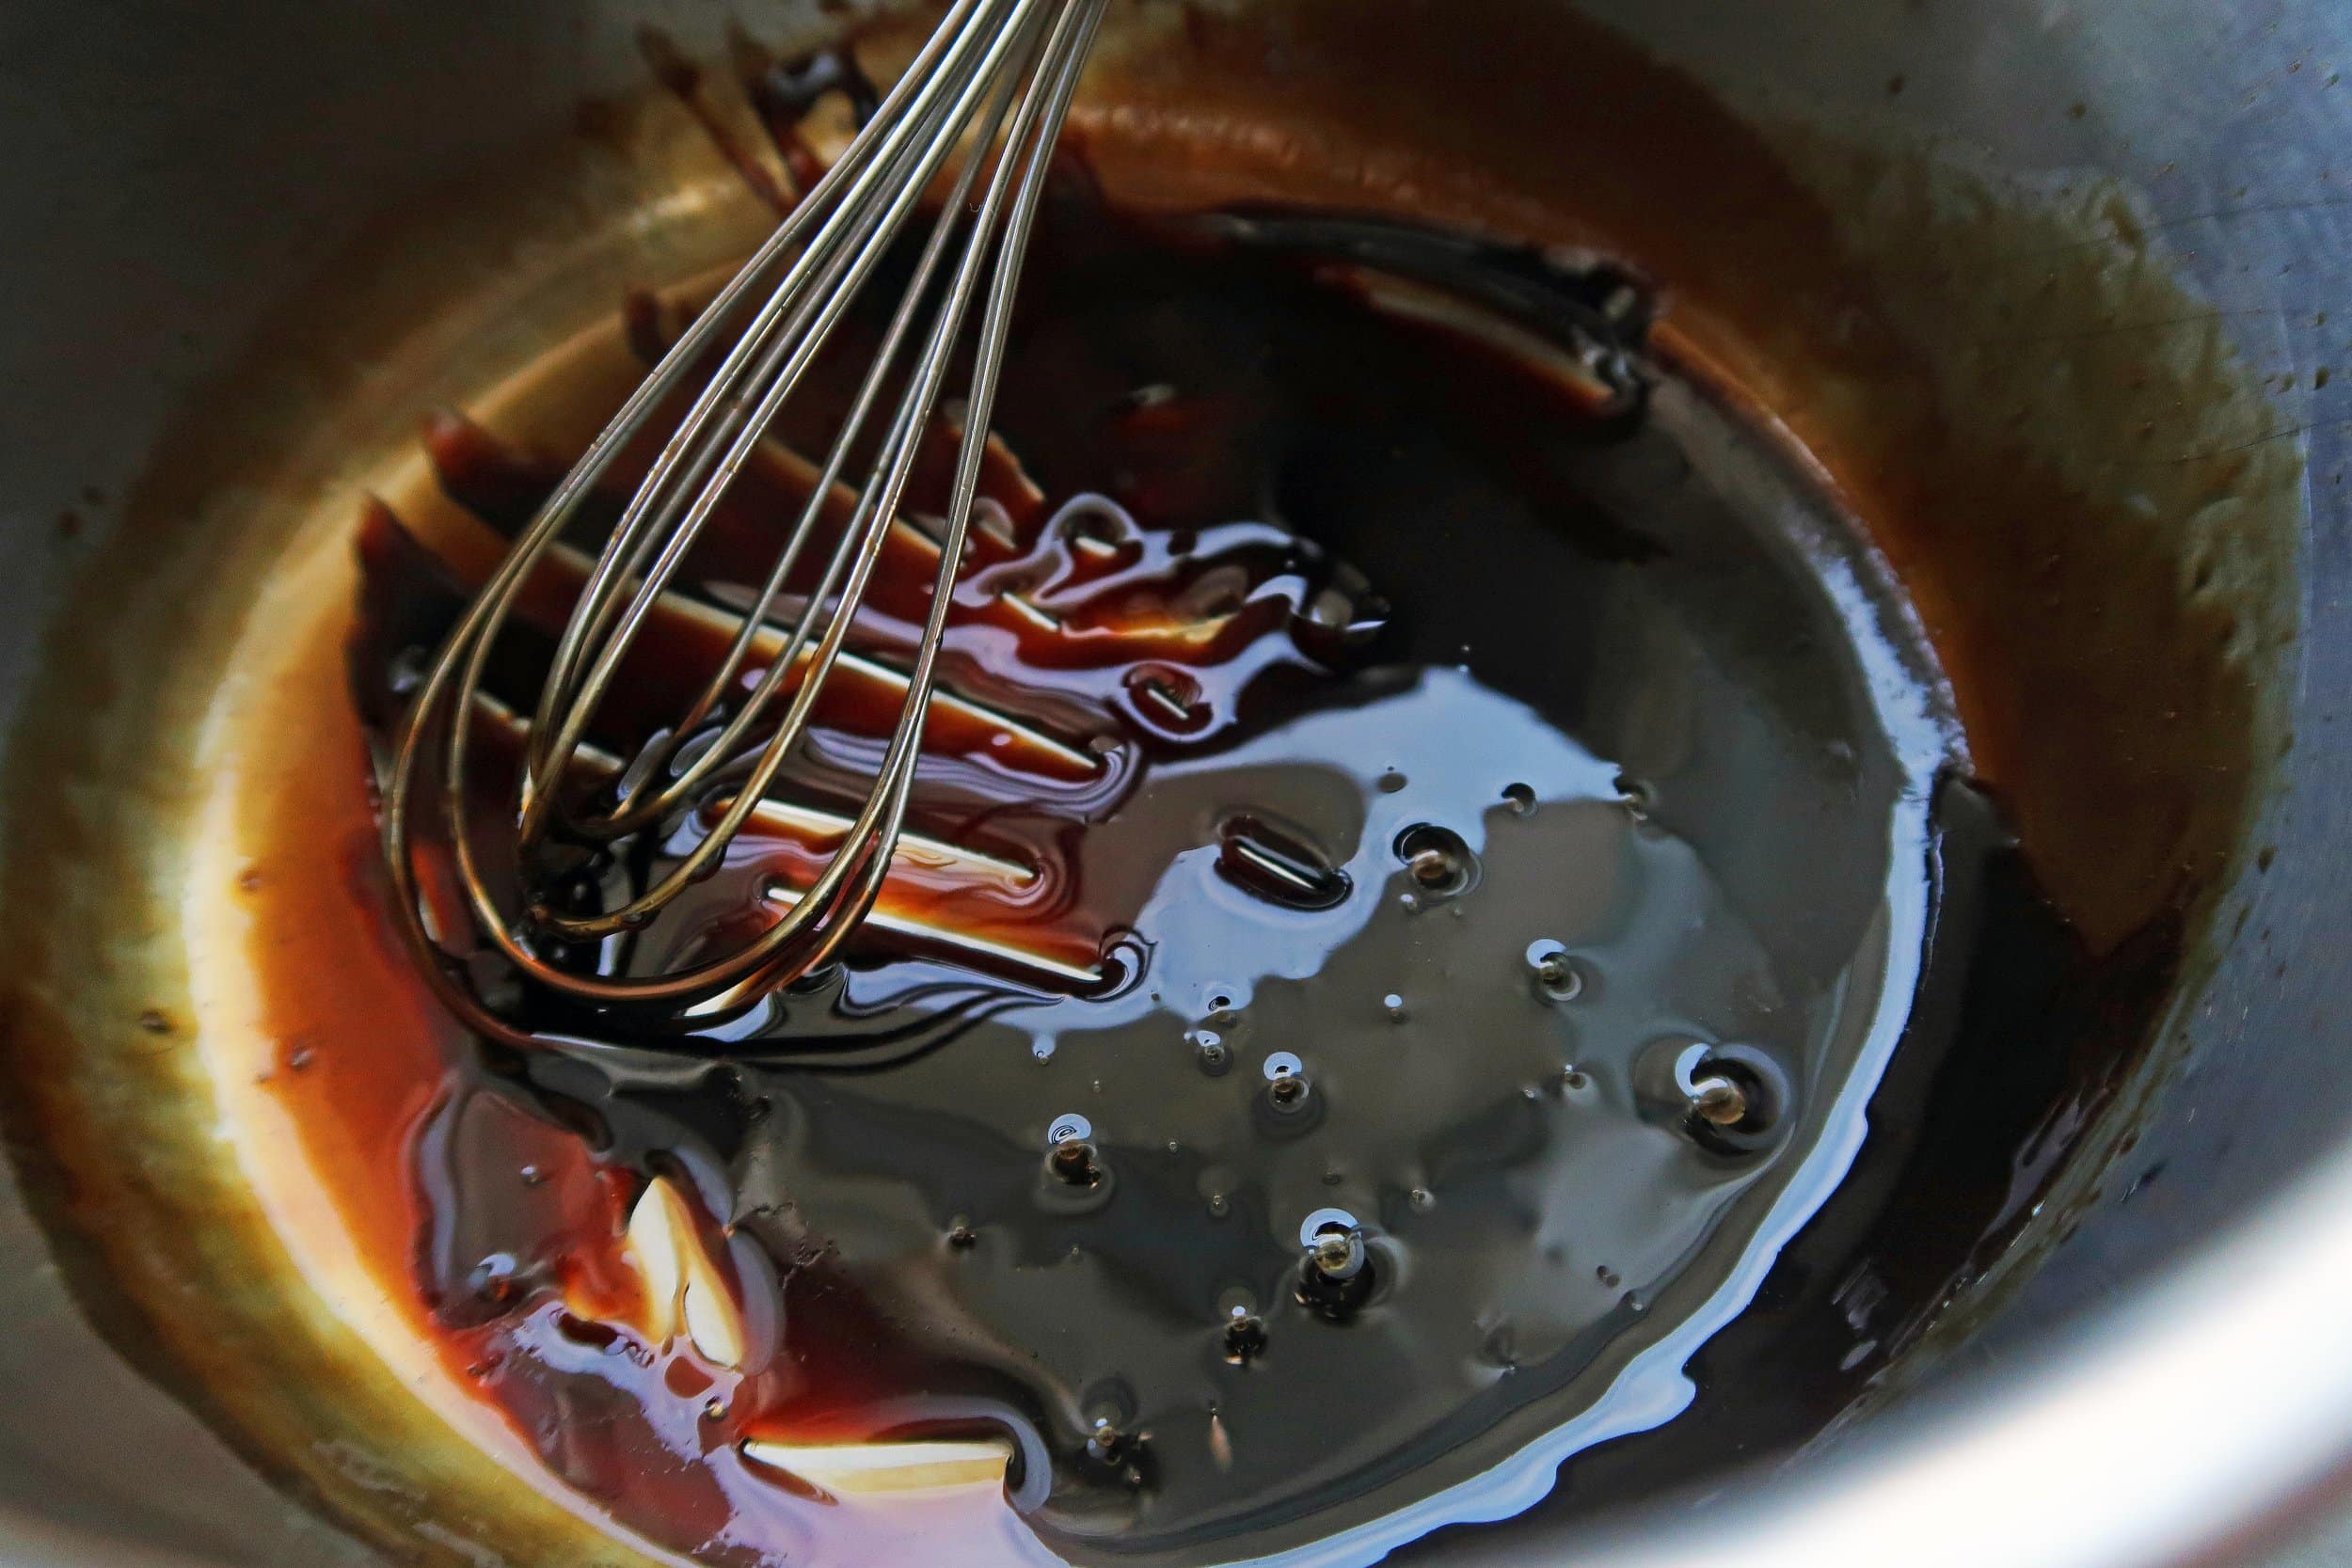 A saucepan containing a balsamic vinegar and maple syrup glaze.